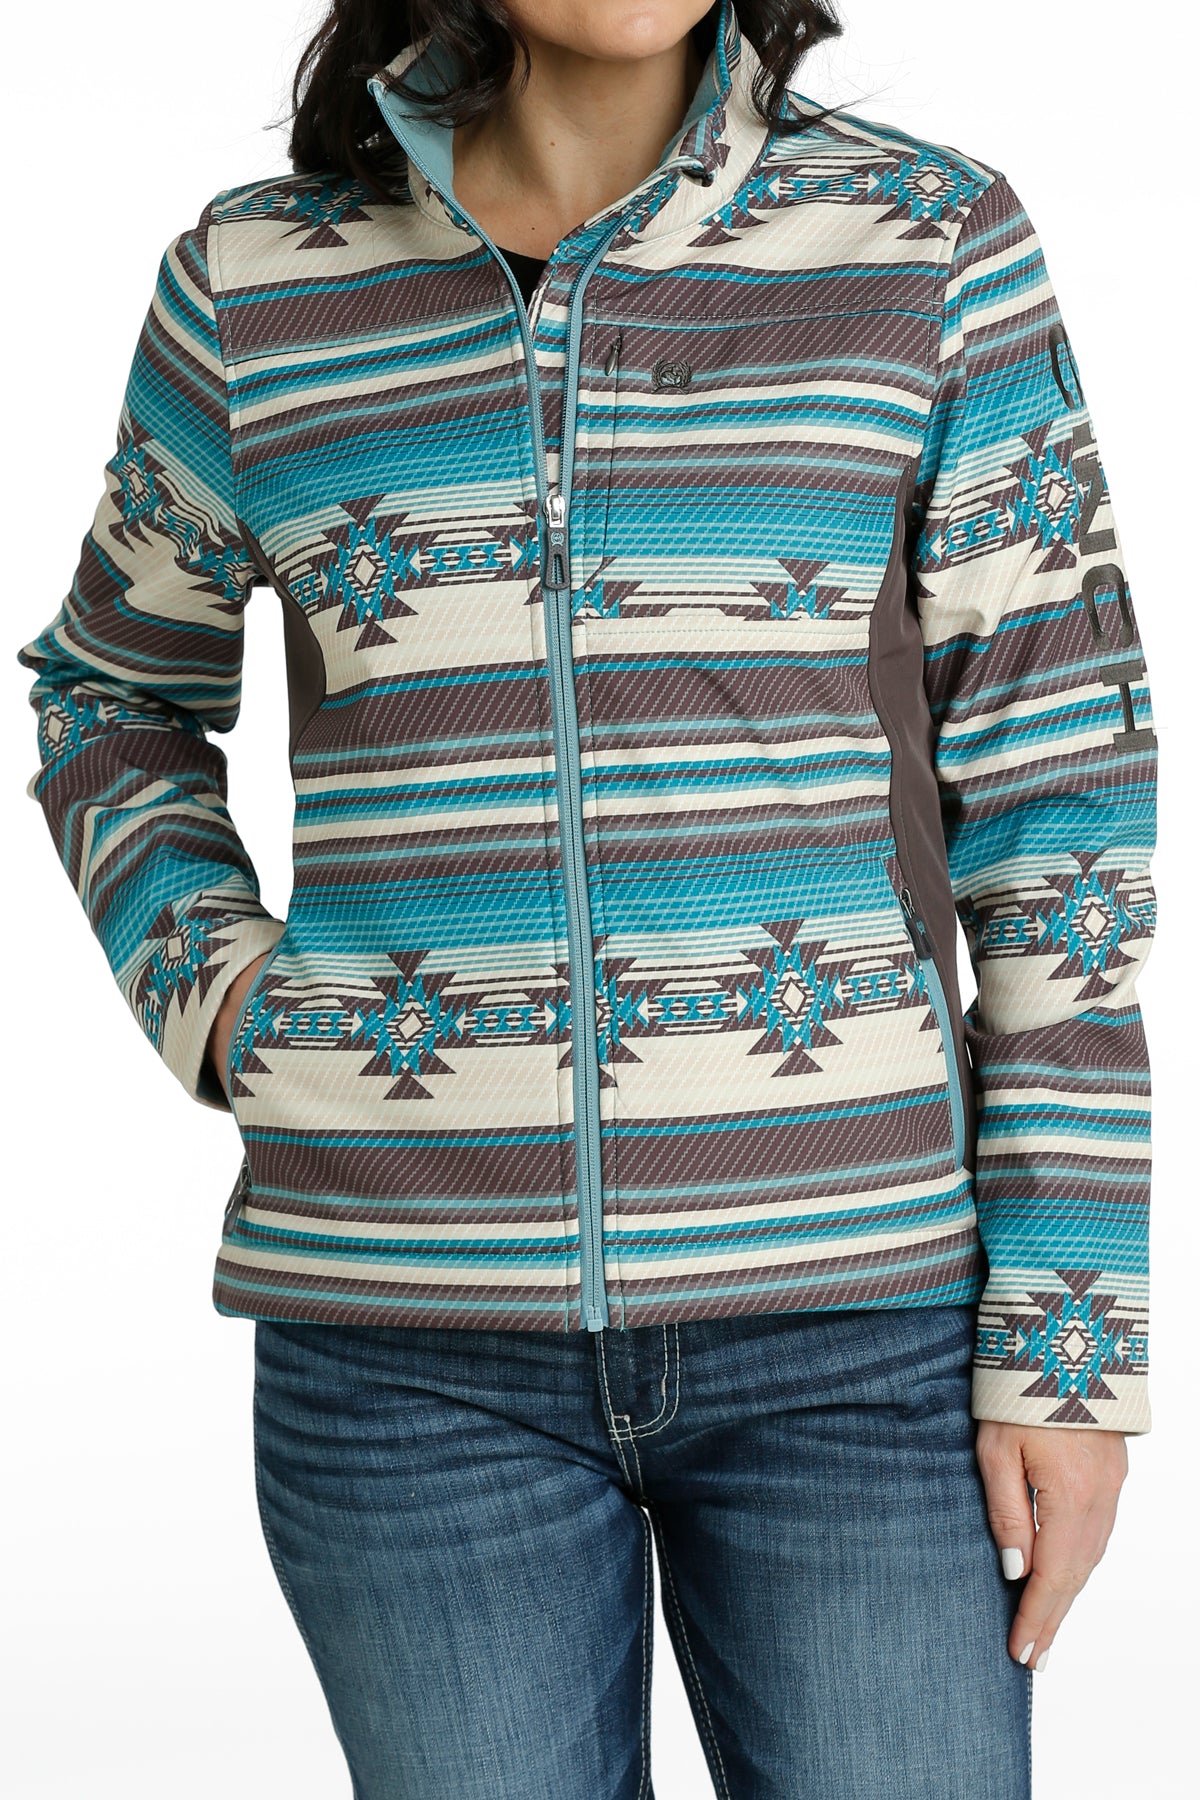 Cinch® Women's Aztec Print Poly-Spandex Concealed Carry Jacket